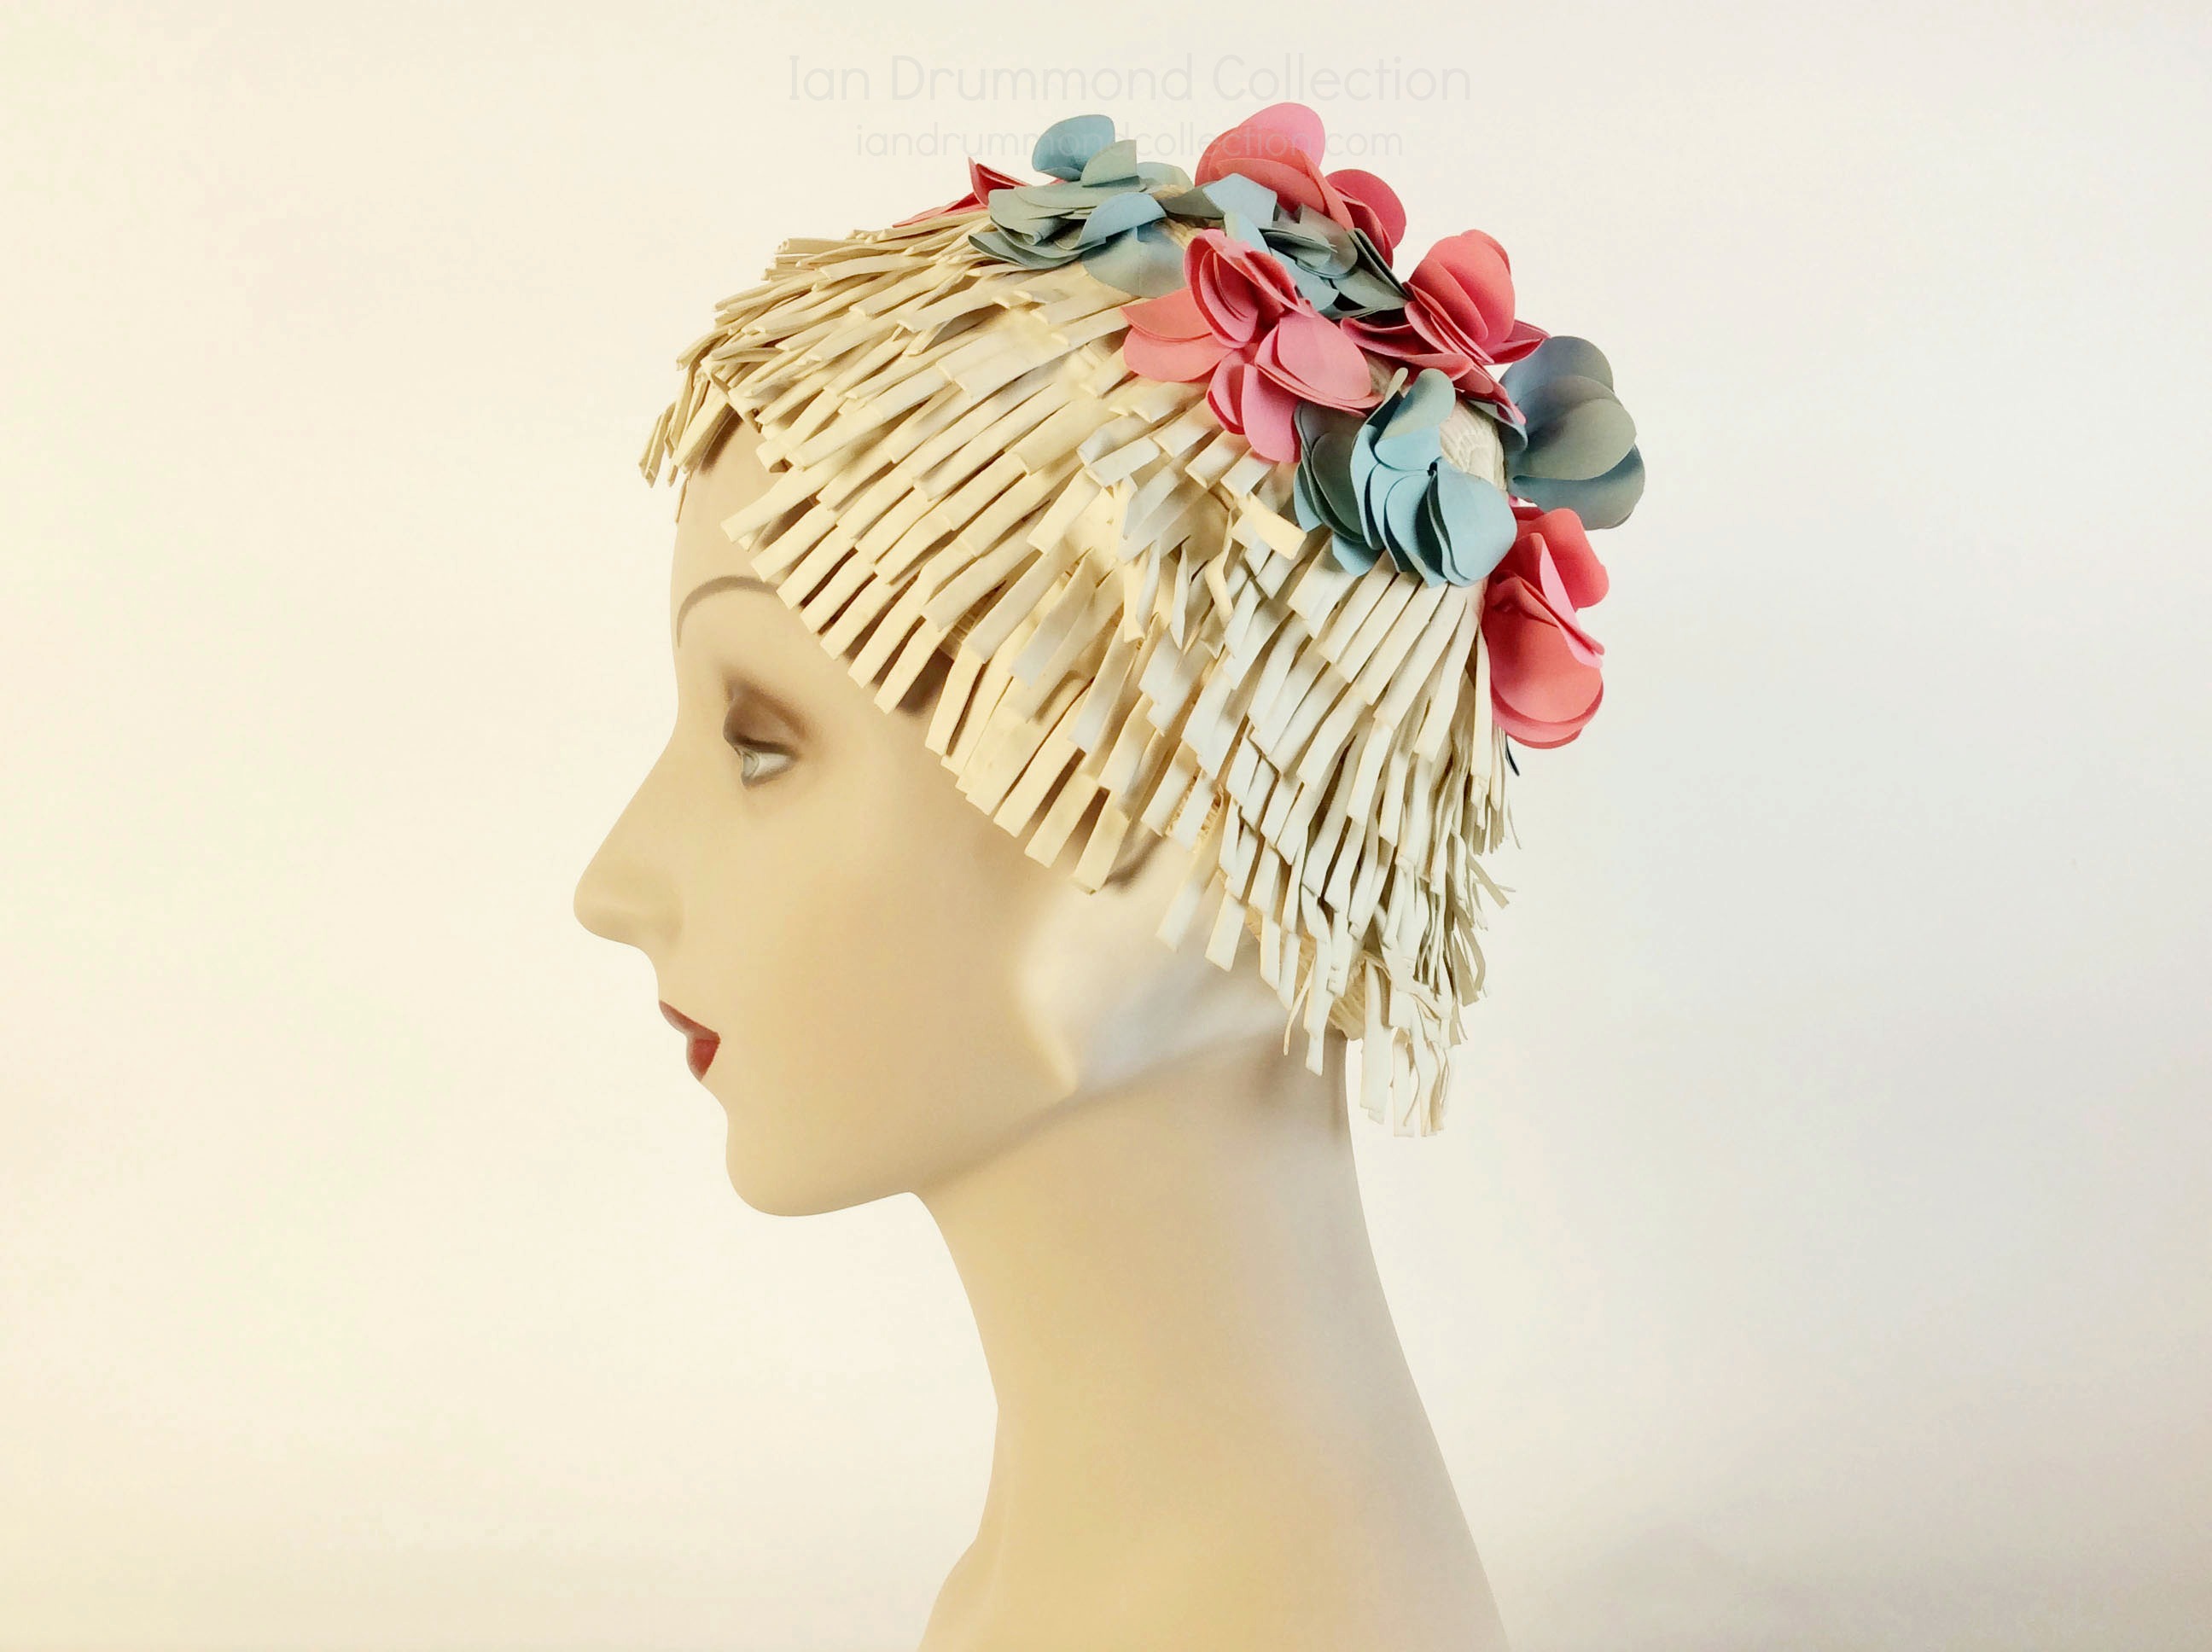 danielle caldwell recommends Old Fashioned Bathing Caps